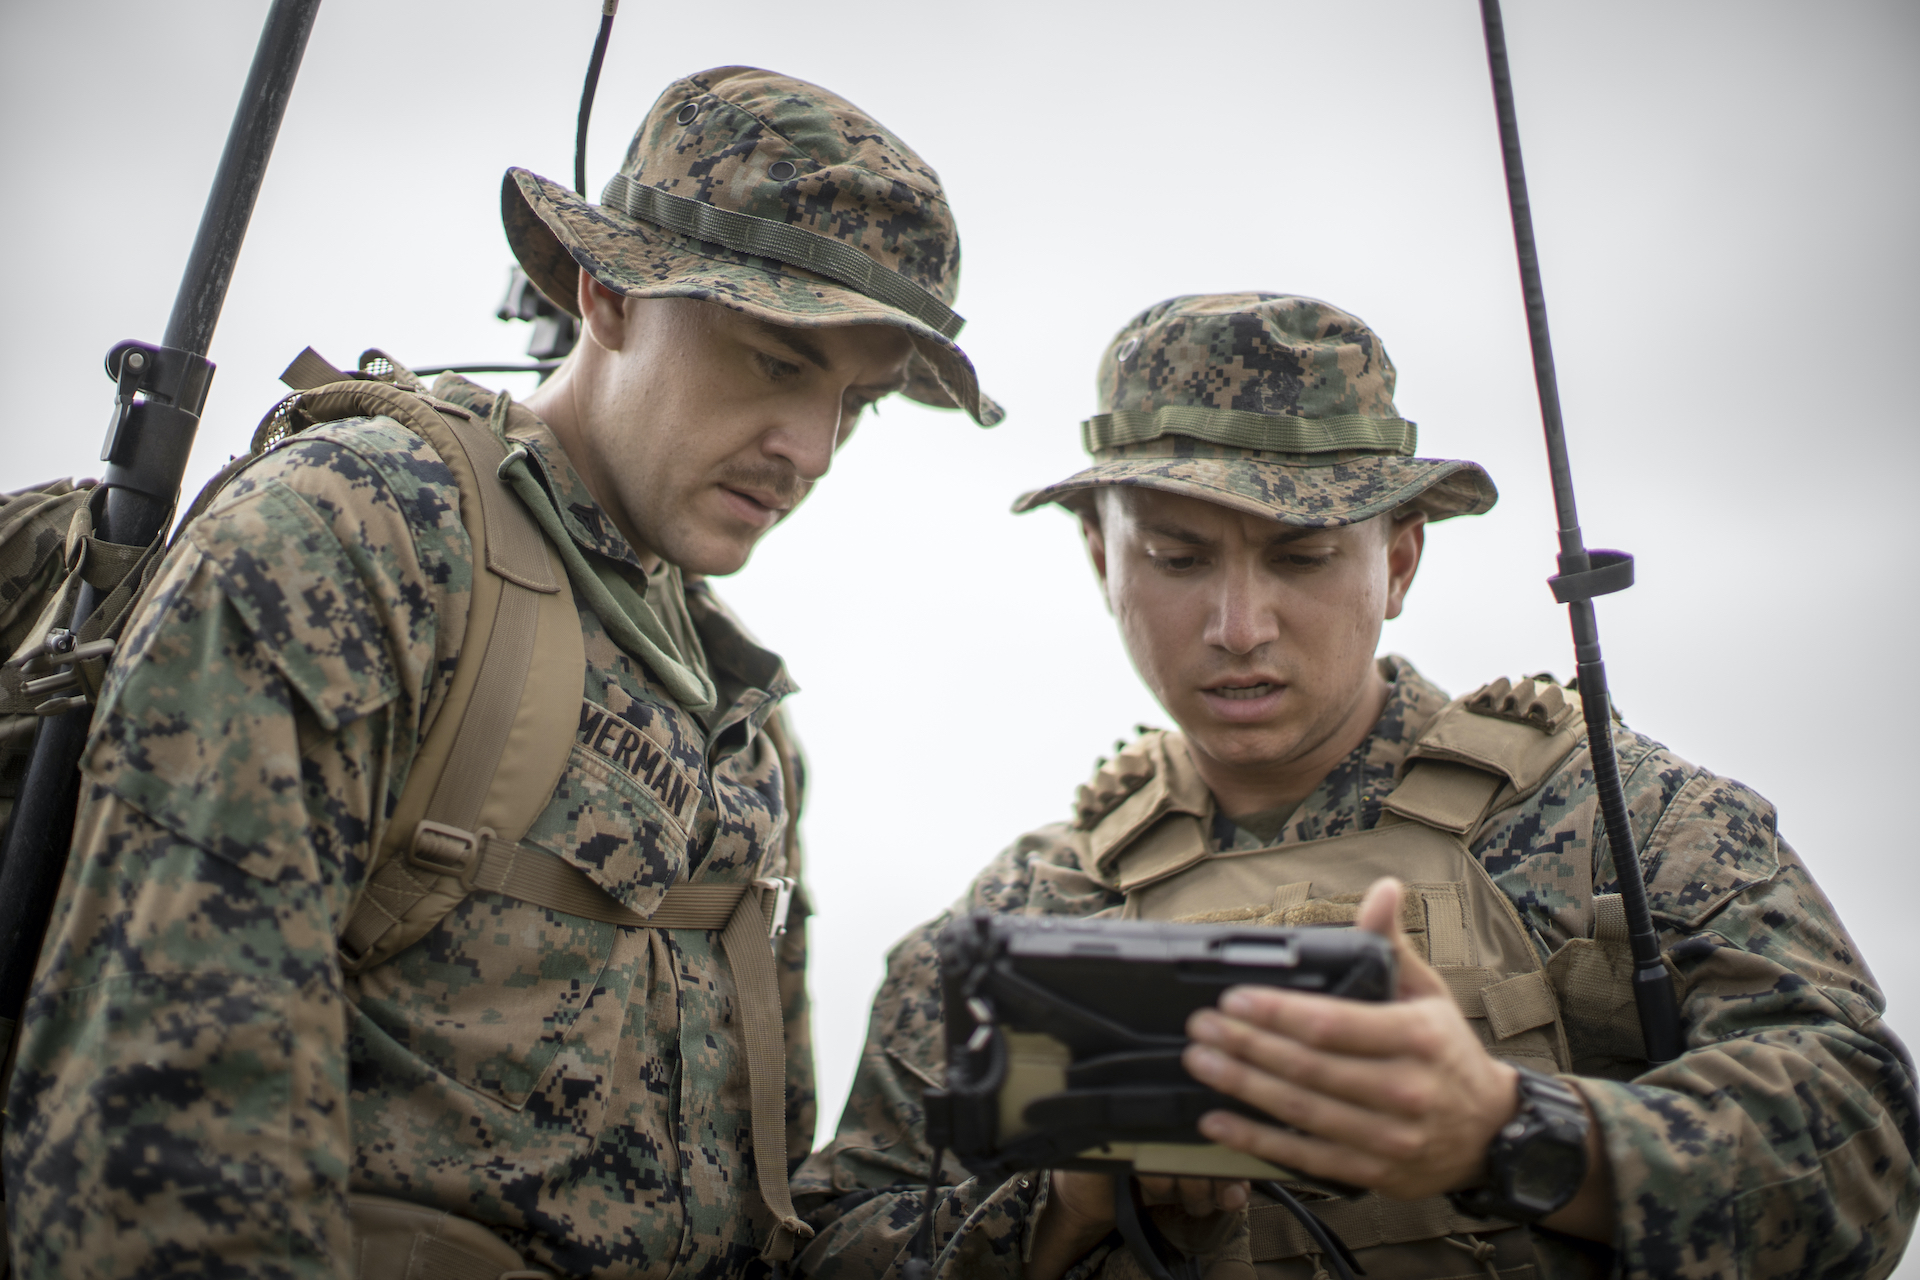 DVIDS - News - Marines, Leaders in Corps and Community